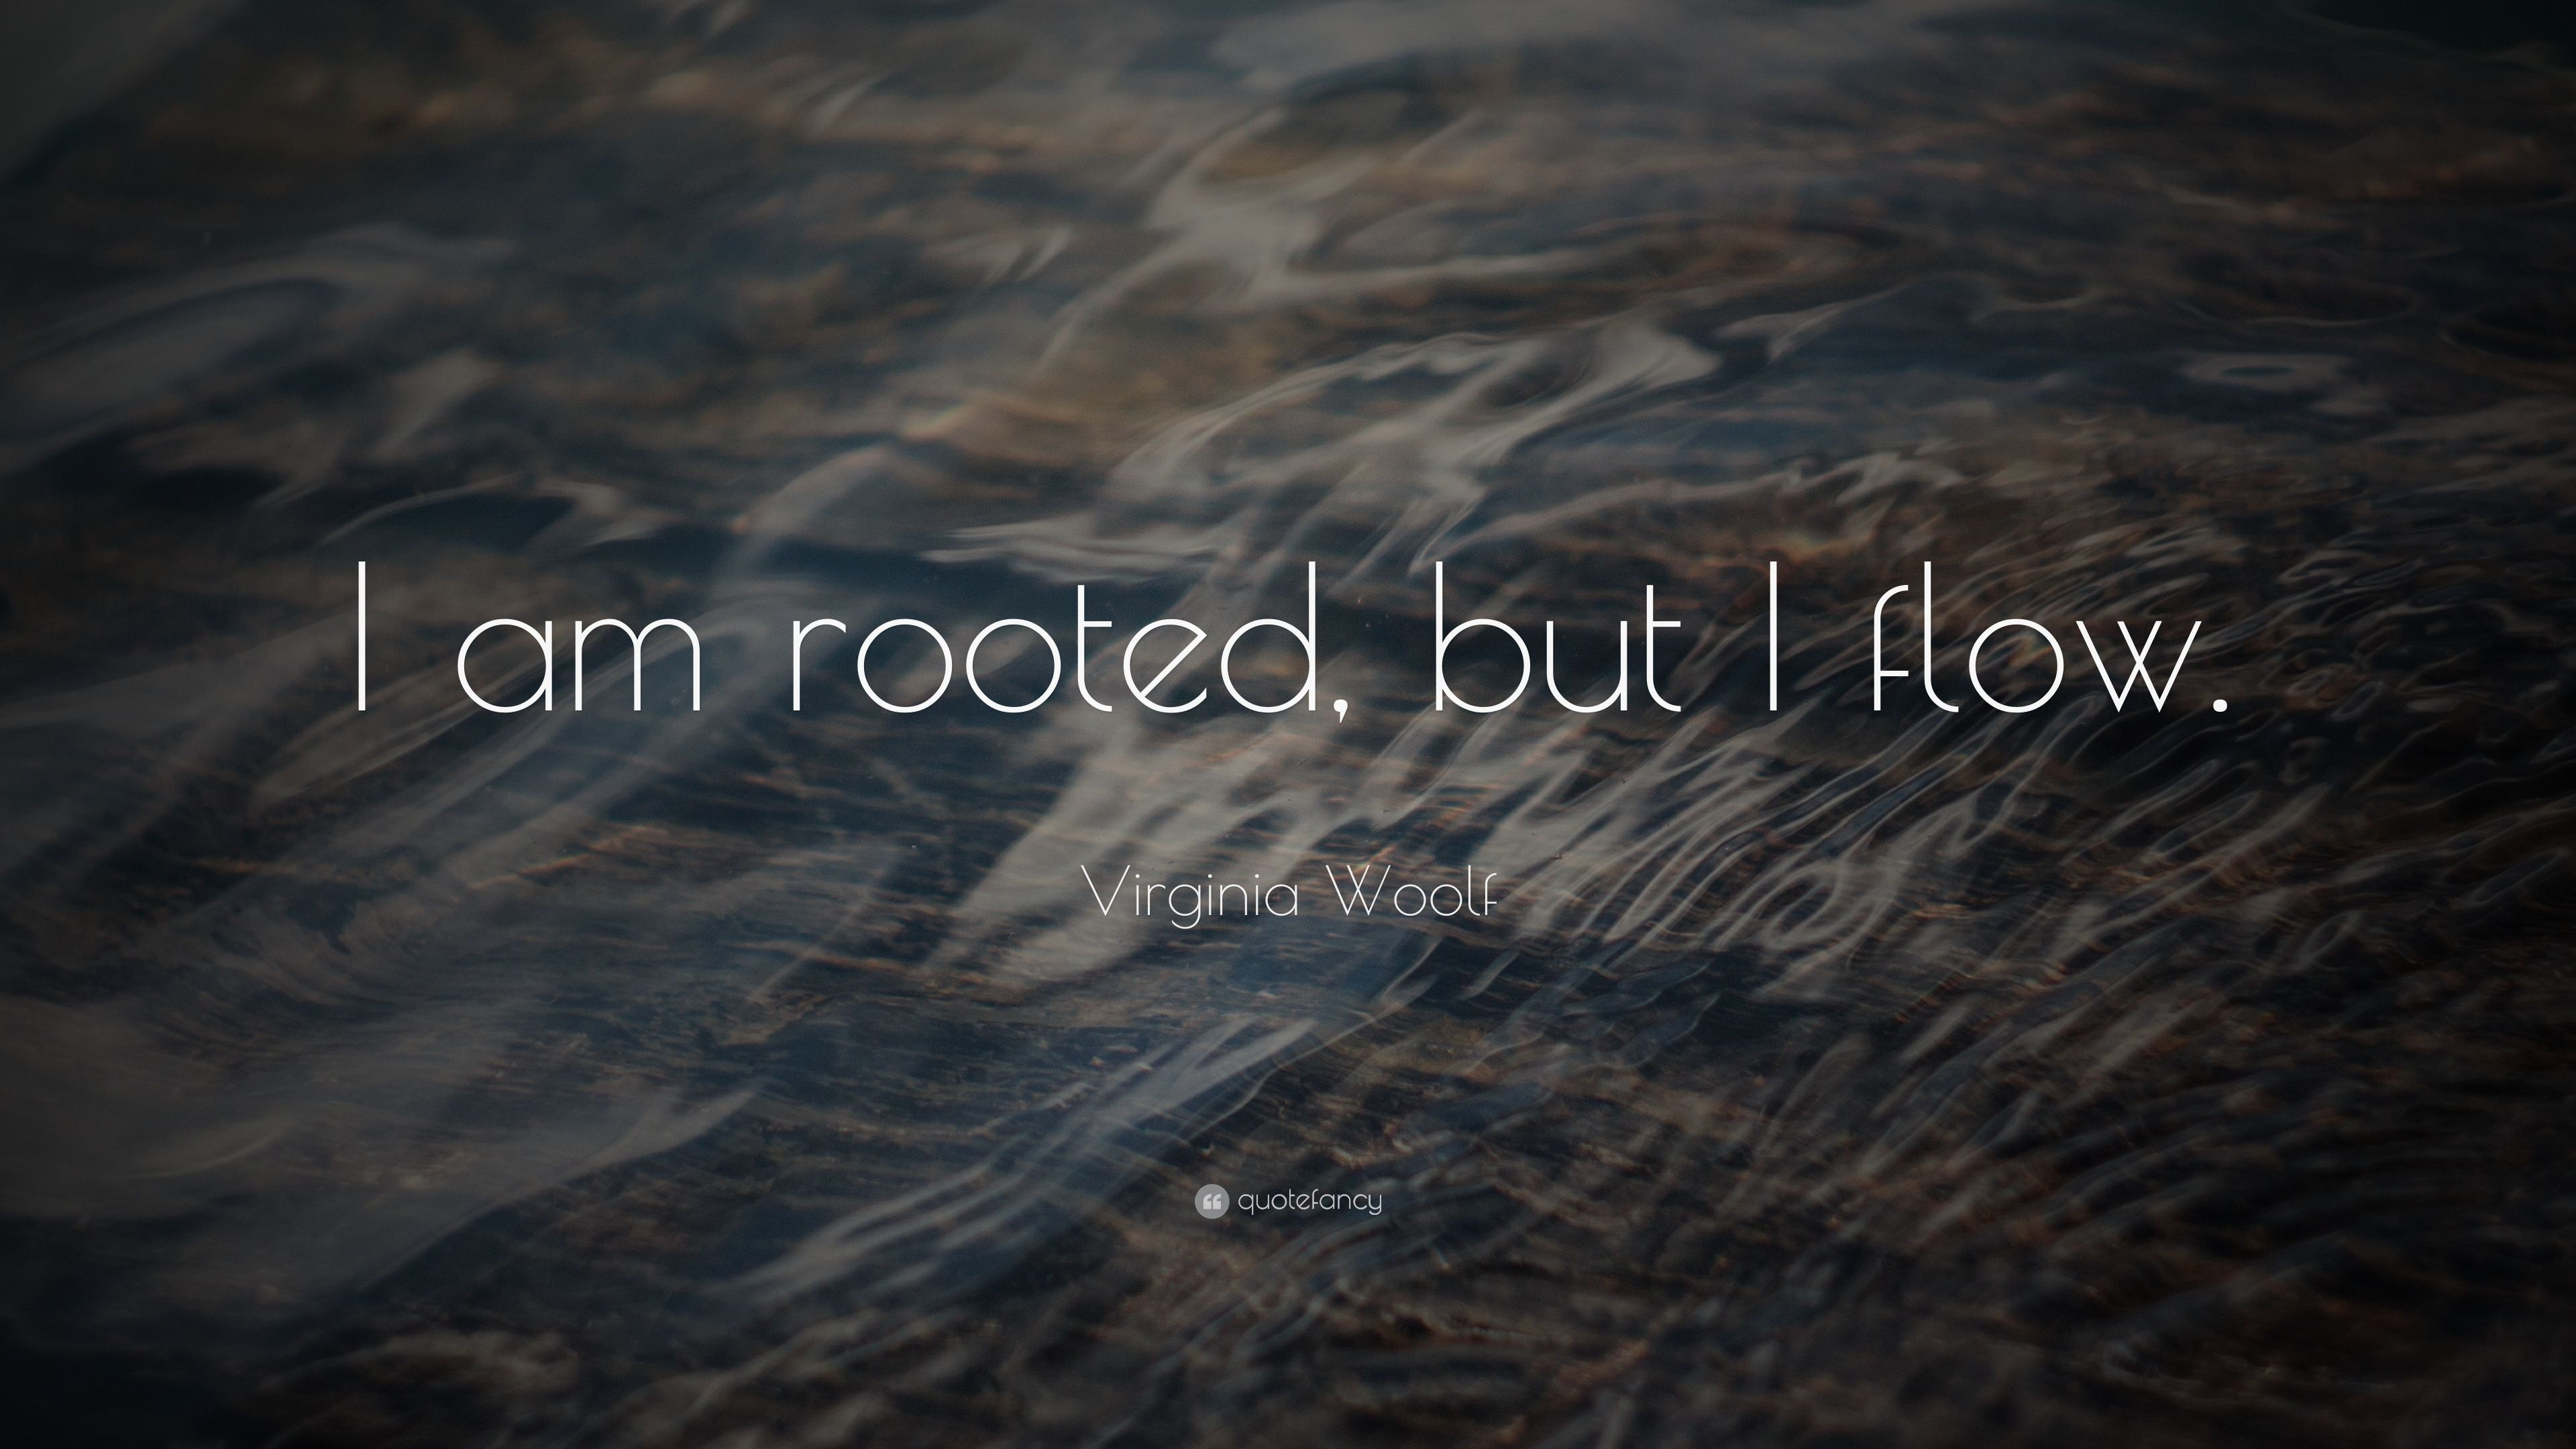 Virginia Woolf Quote: “I am rooted, but I flow.” 16 wallpaper